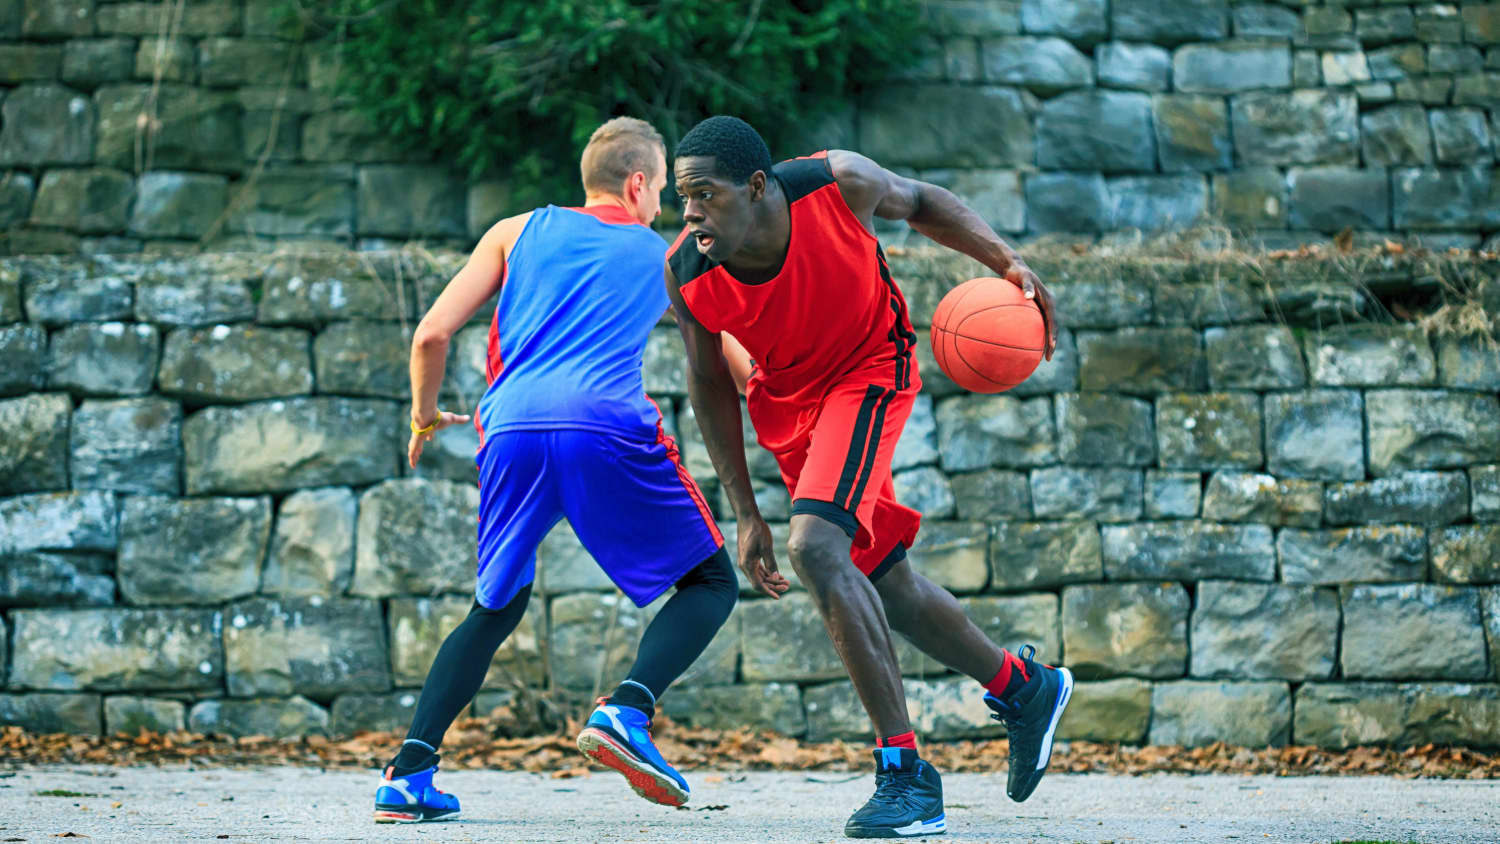 Two young people play basketball in a park.